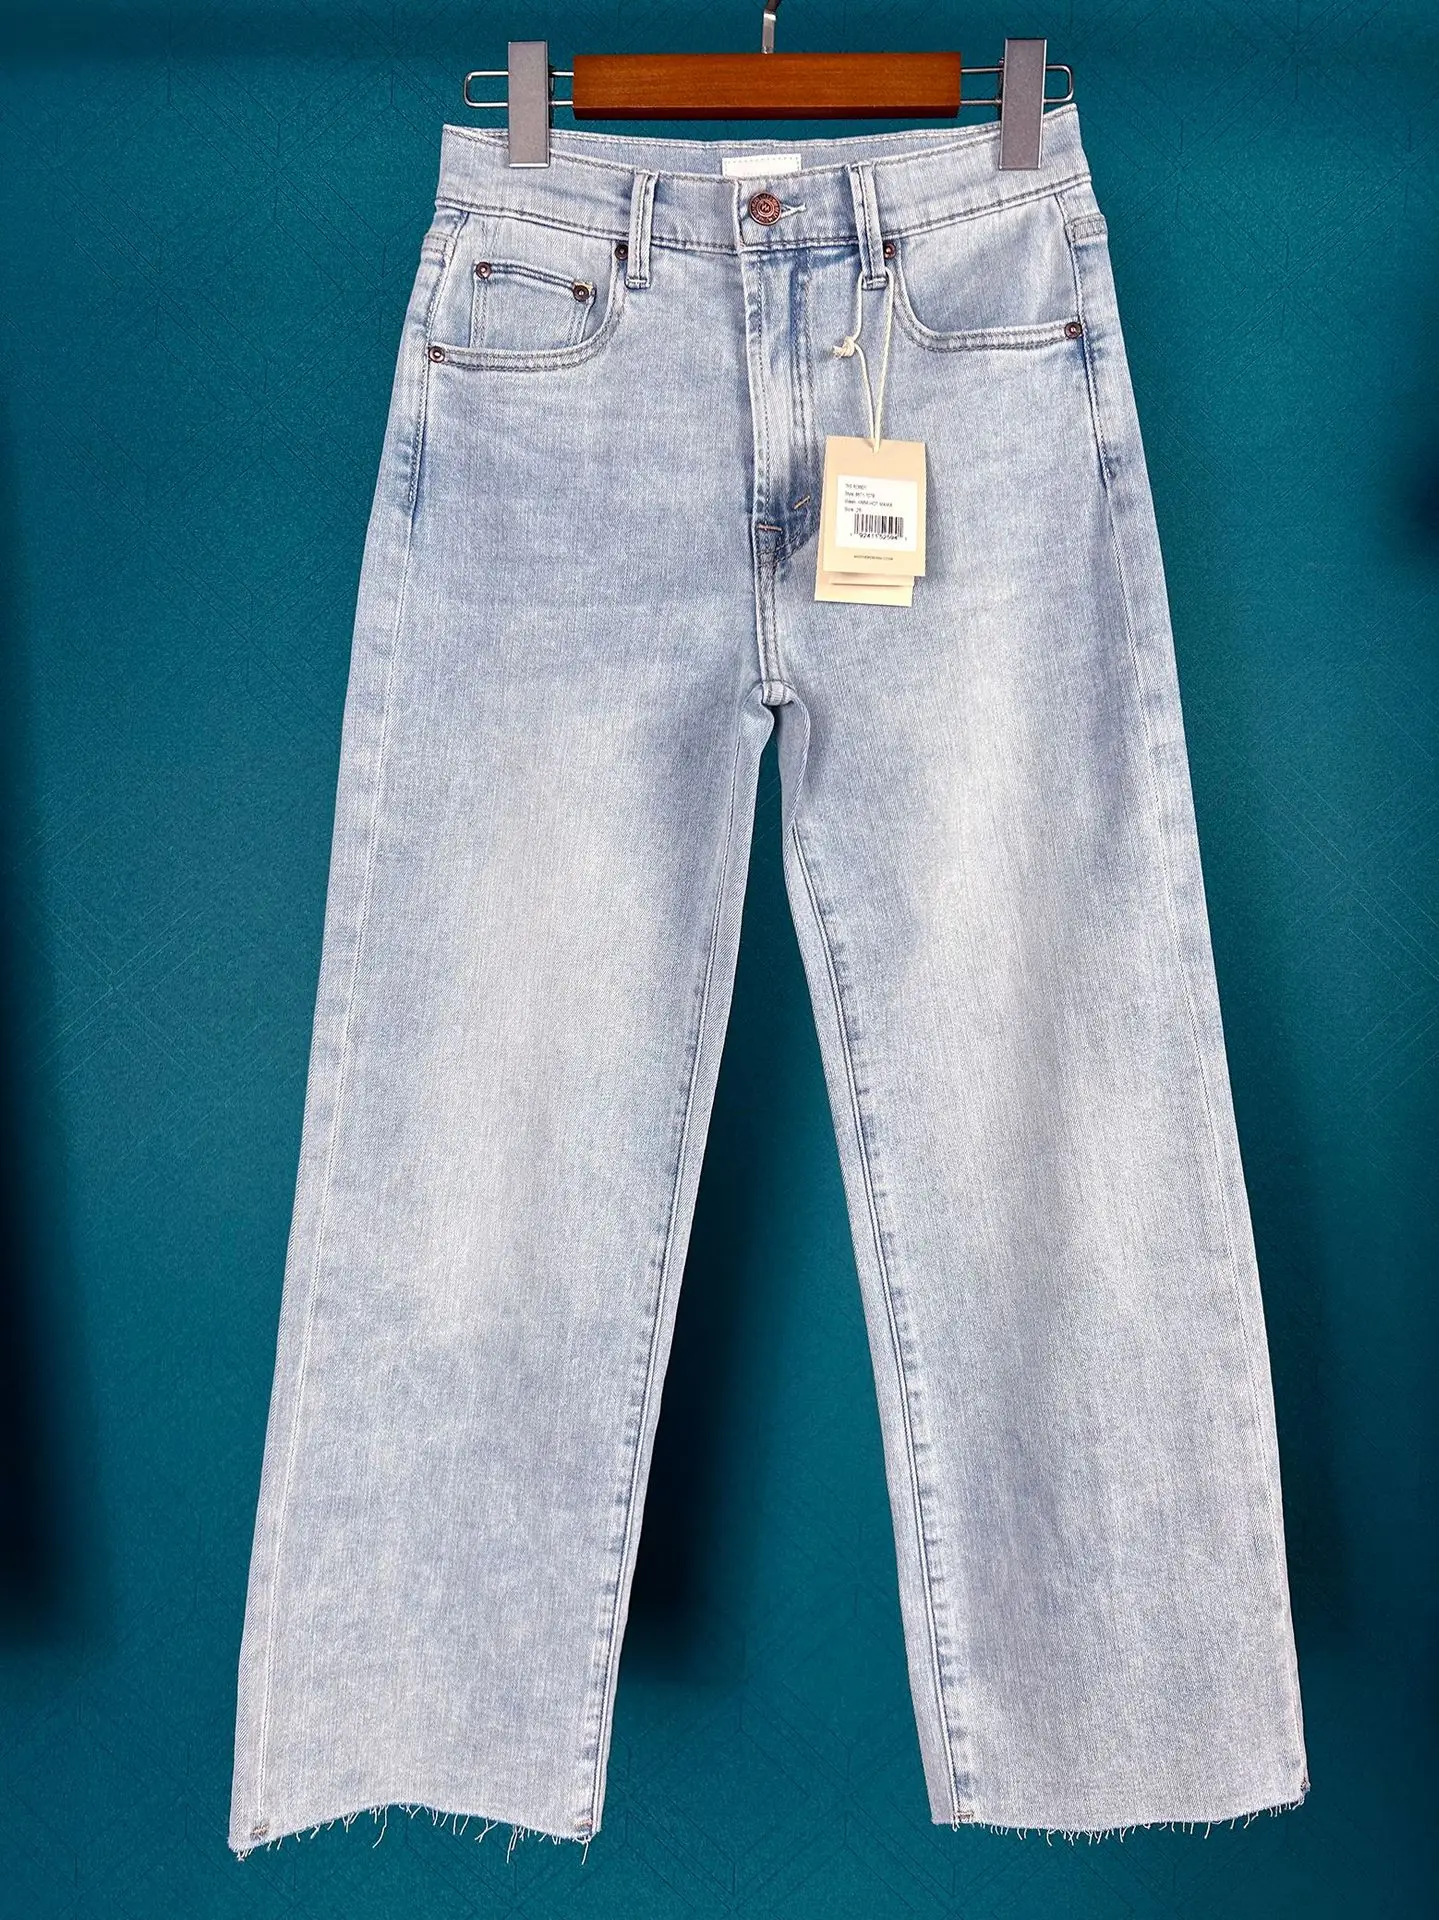 Women denim pants 2023 new High waisted light blue loose fitting straight ankle length jeans